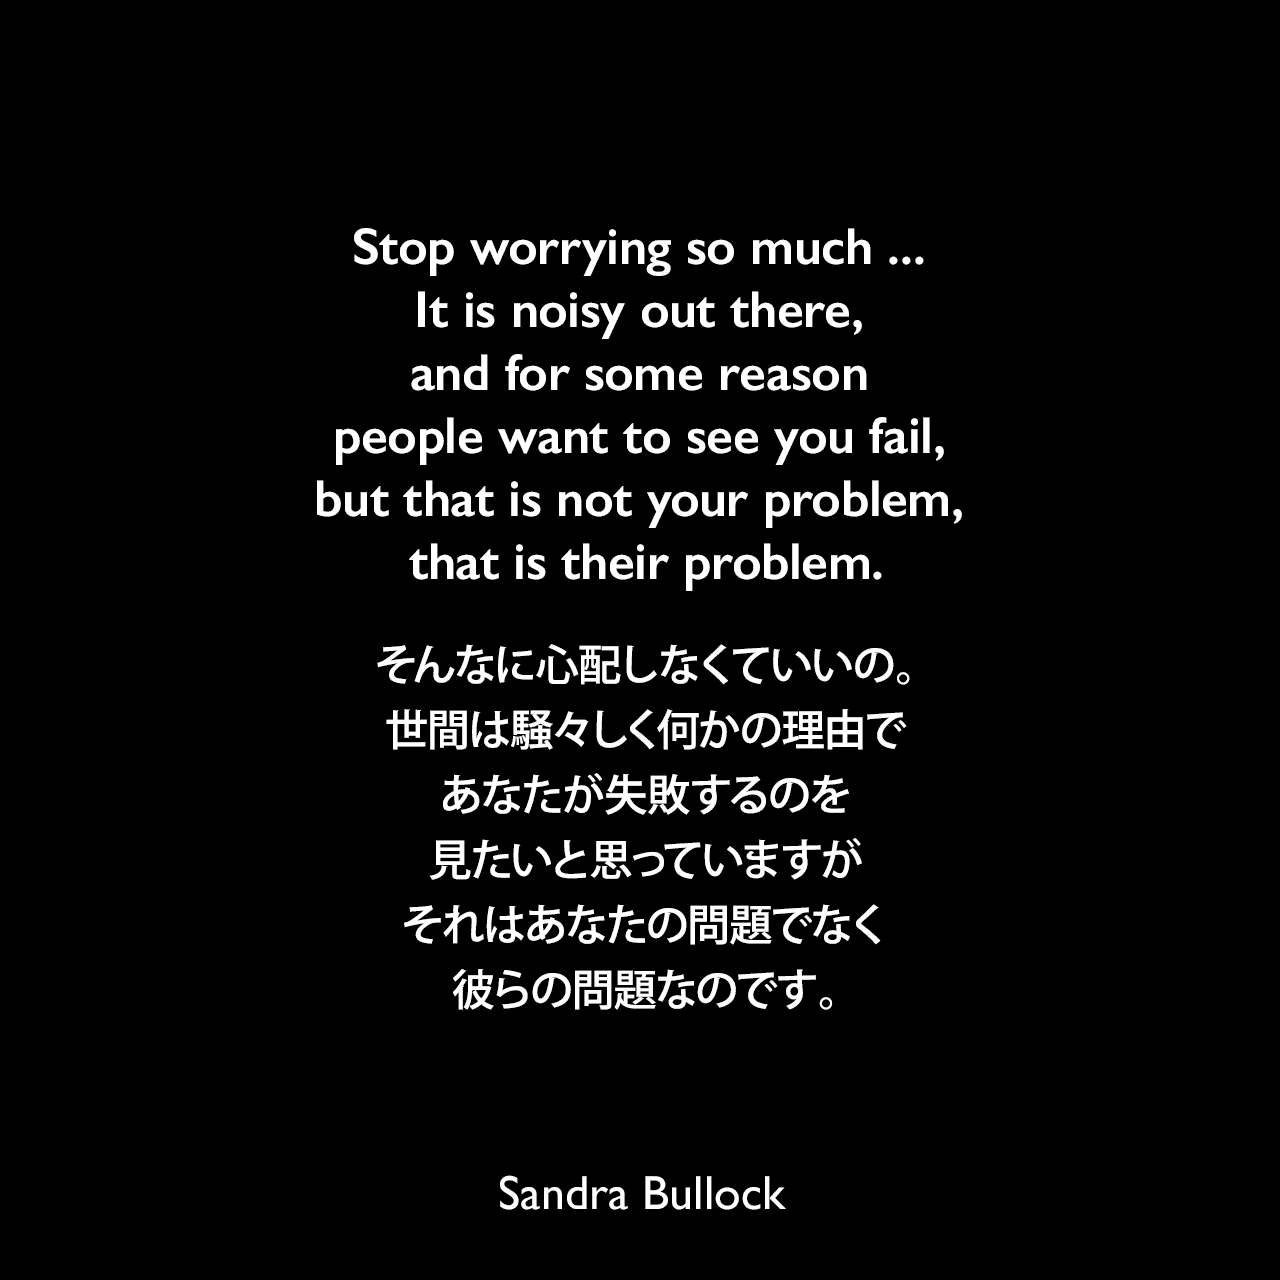 Stop worrying so much ... It is noisy out there, and for some reason people want to see you fail, but that is not your problem, that is their problem.そんなに心配しなくていいの。世間は騒々しく何かの理由であなたが失敗するのを見たいと思っていますが、それはあなたの問題でなく、彼らの問題なのです。Sandra Bullock